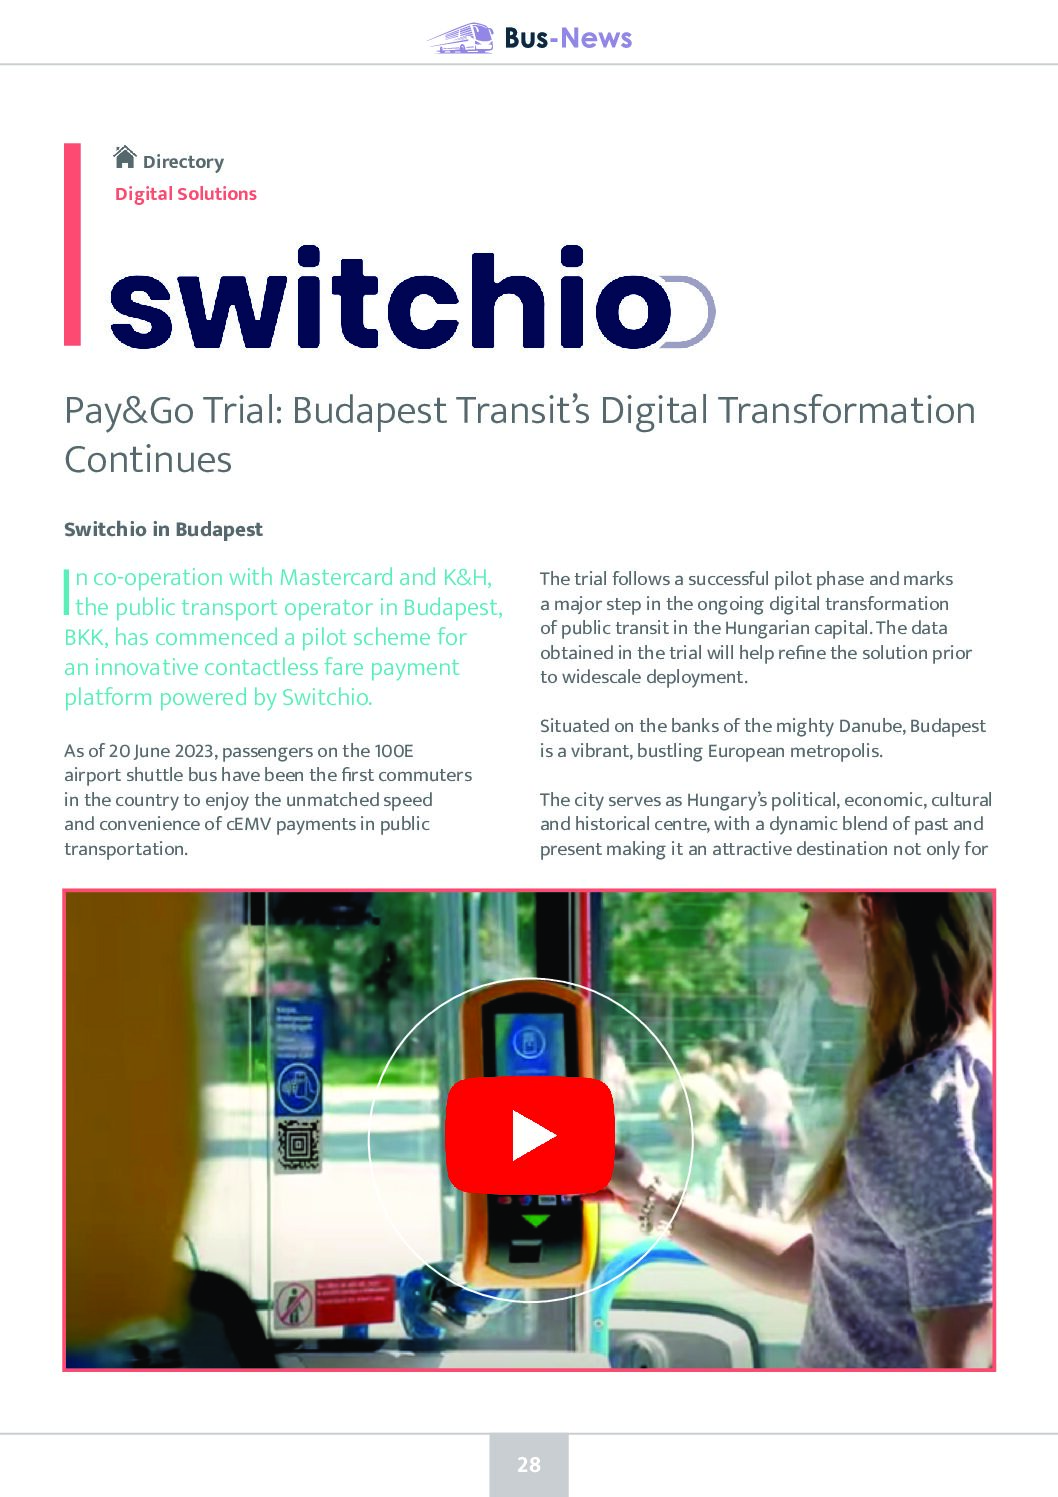 Pay&Go Trial: Budapest Transit’s Digital Transformation Continues